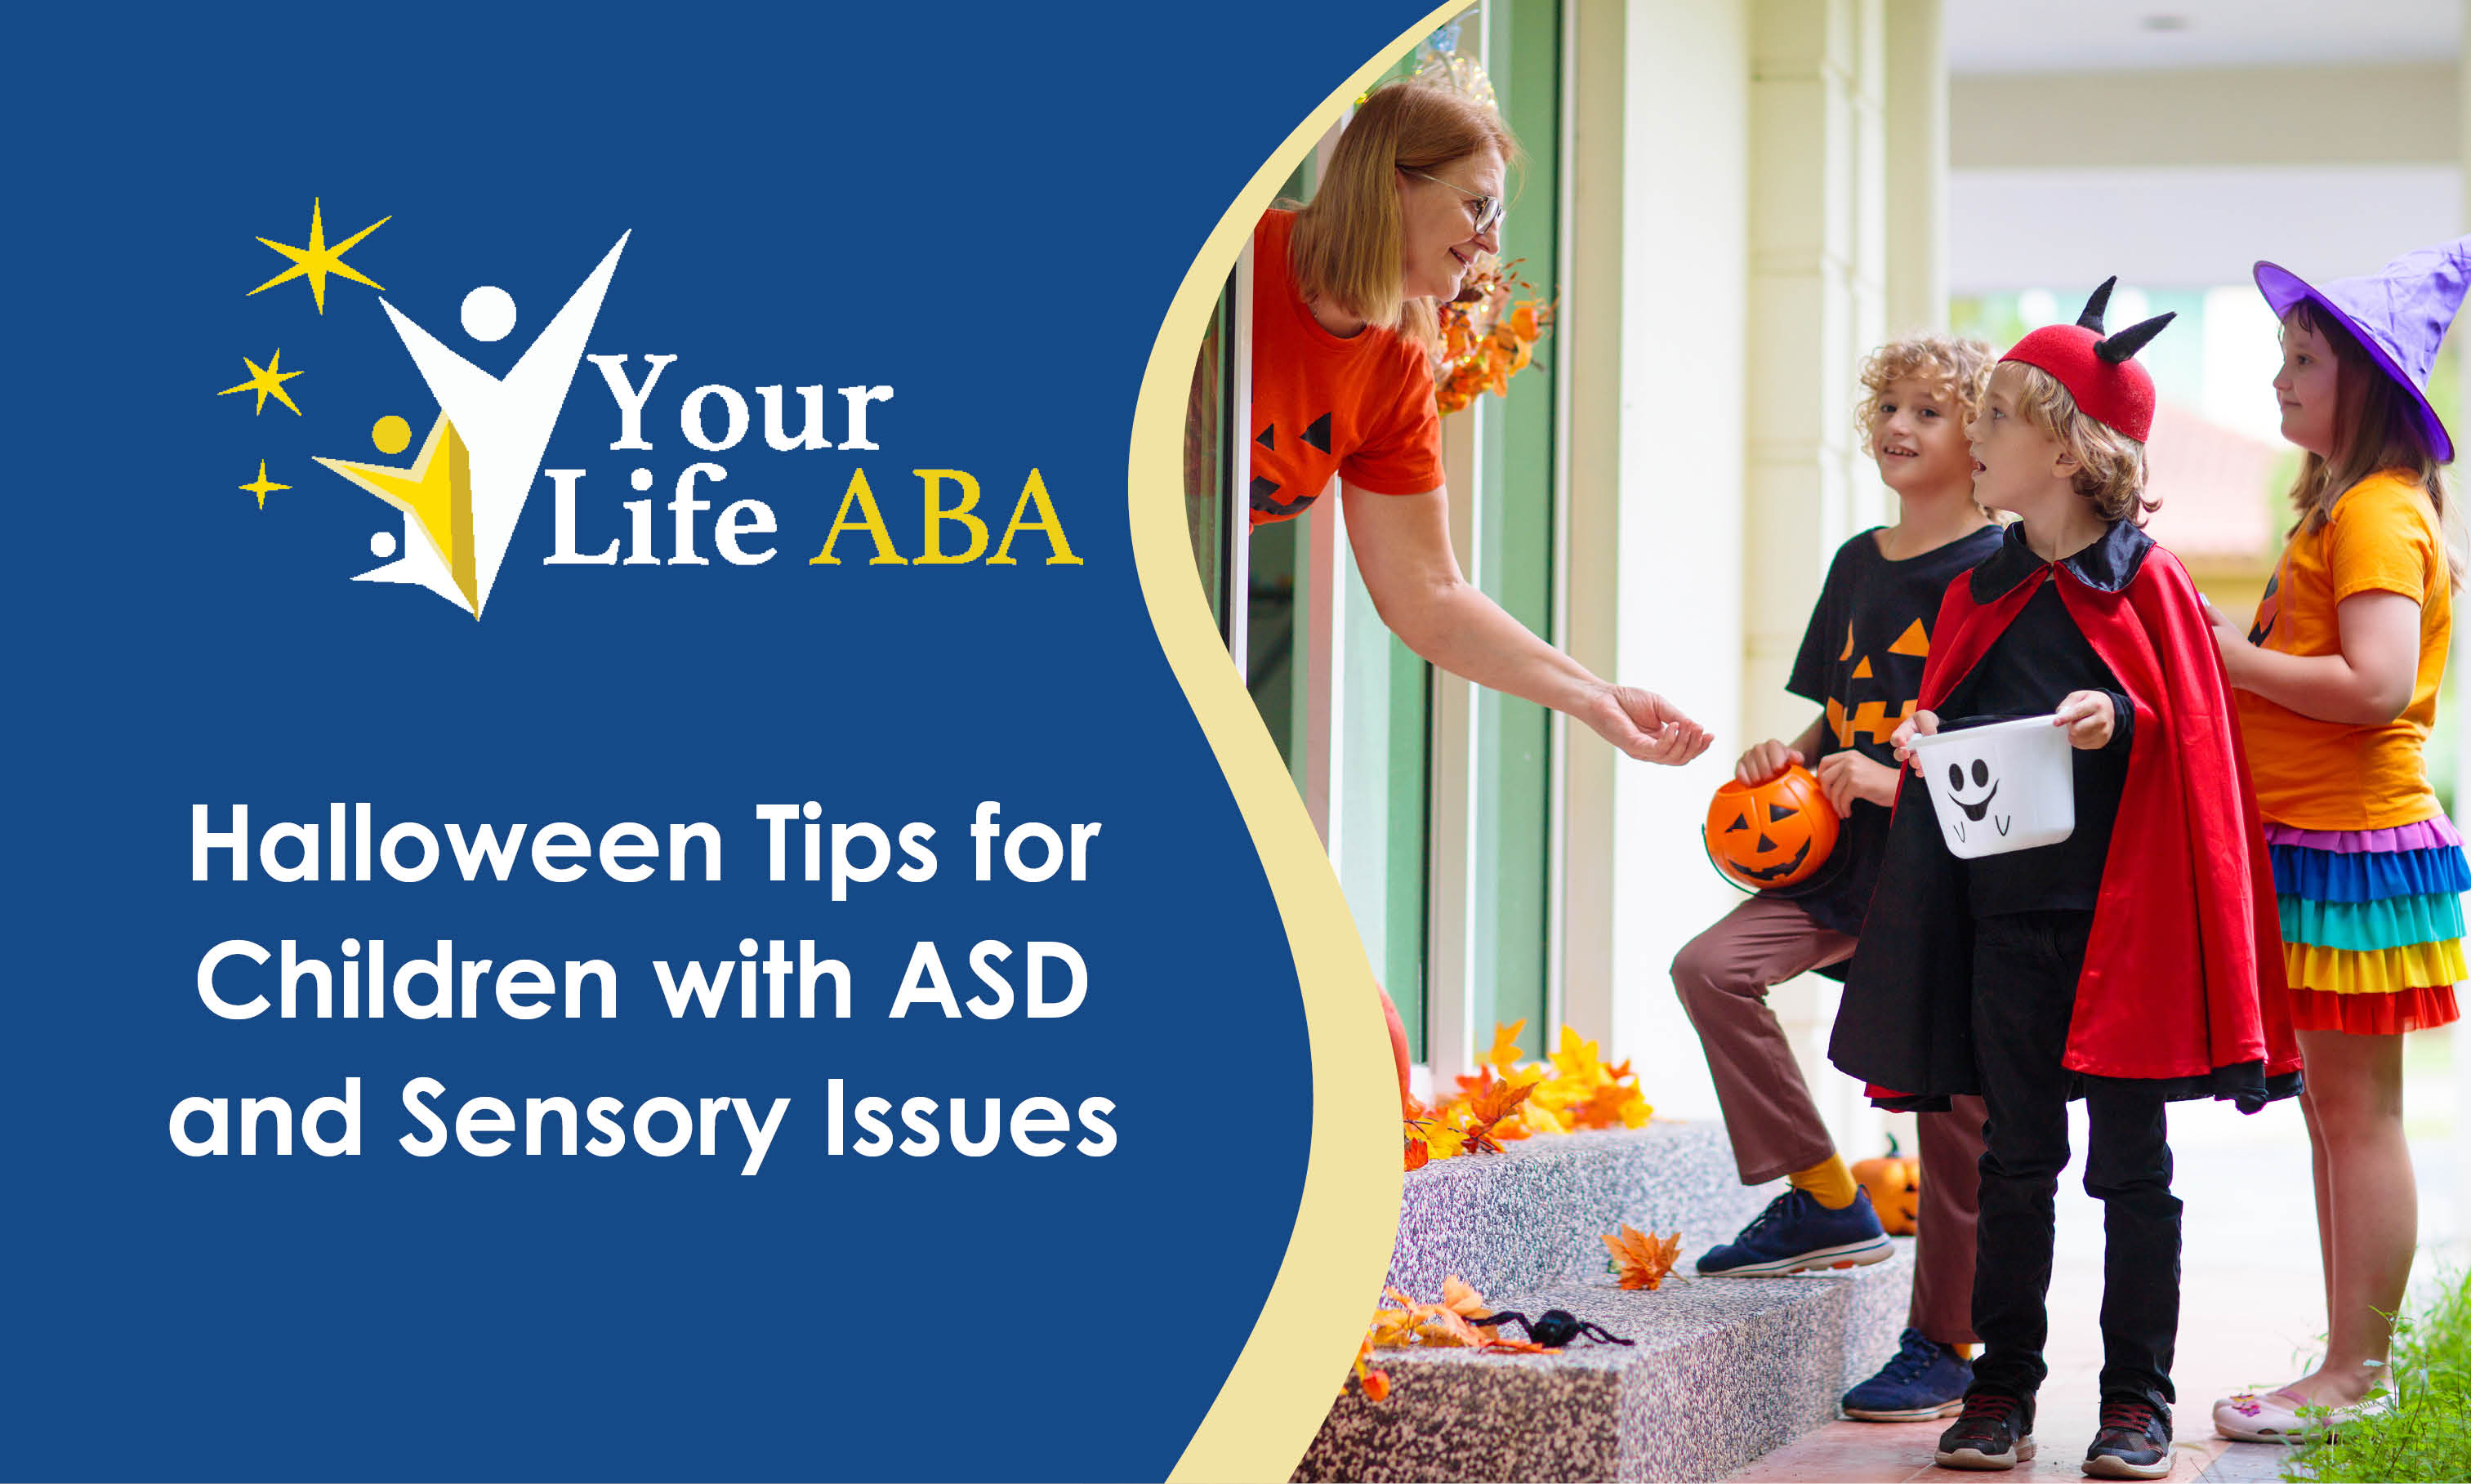 Halloween Tips for Children with ASD and Sensory Issues